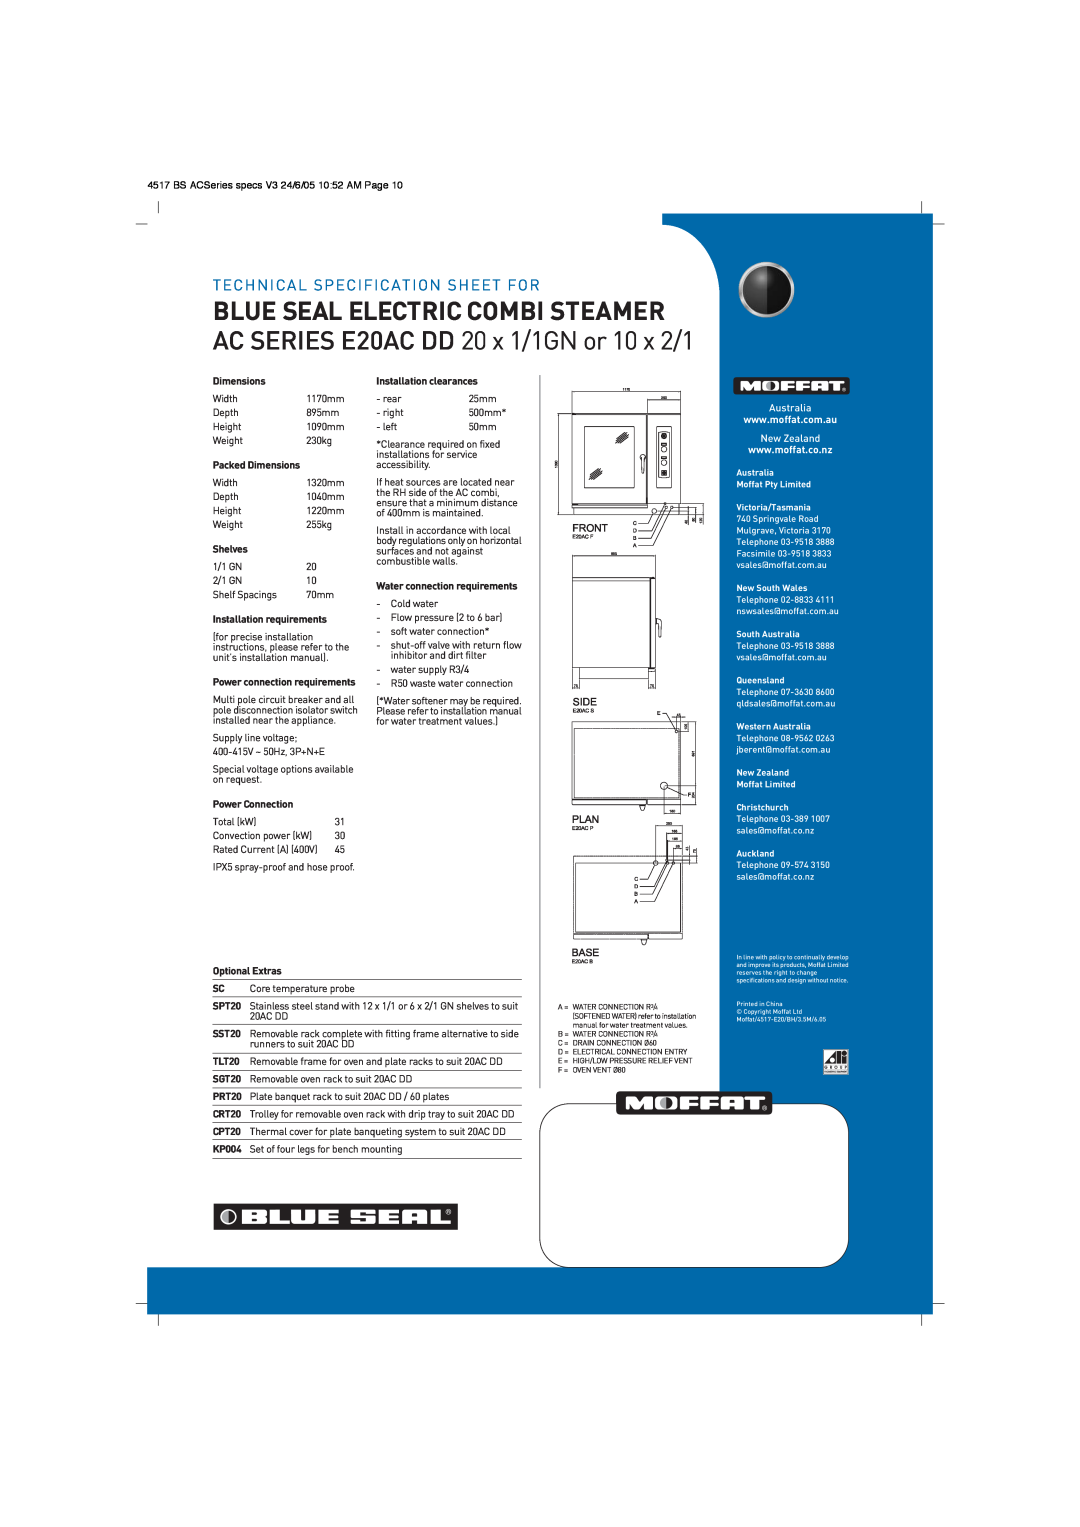 Moffat Blue Seal Electric Combi Steamer, AC SERIES E20AC DD 20 x 1/1GN or 10 x 2/1, Technical Specification Sheet For 